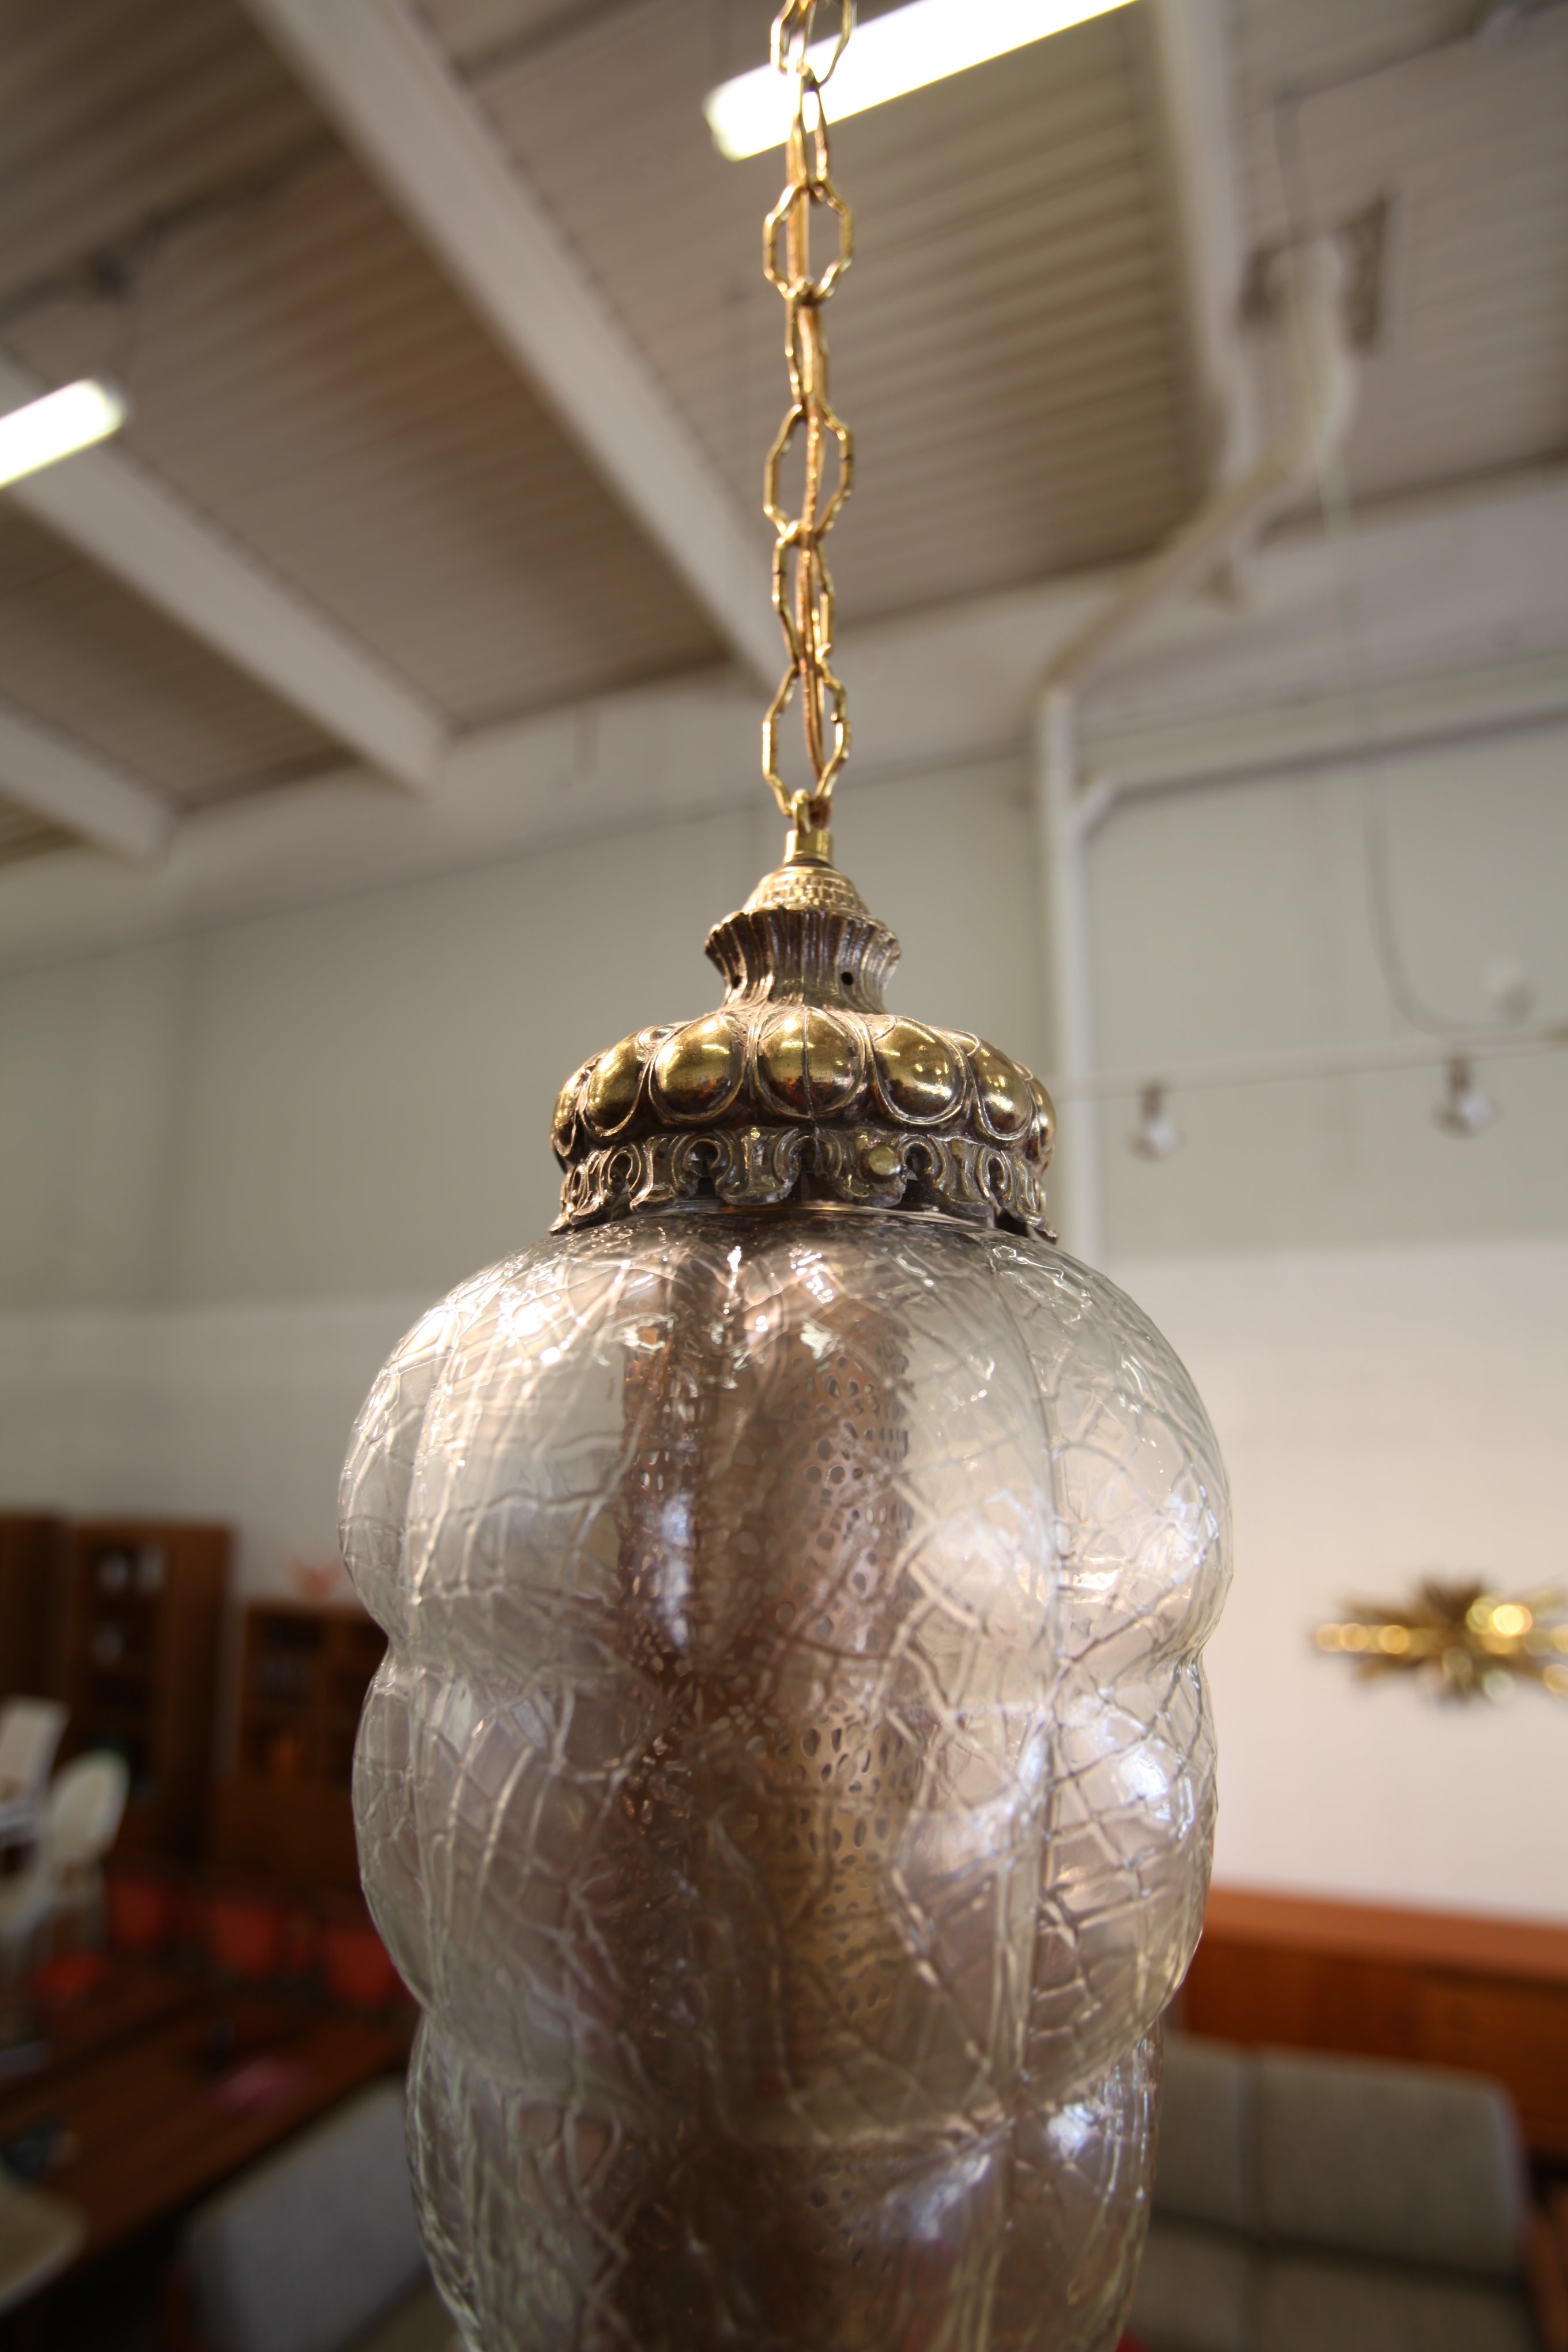 Vintage Glass & Brass Hanging Swag Lamp (19"H x 8"W) w/ Long brass chain